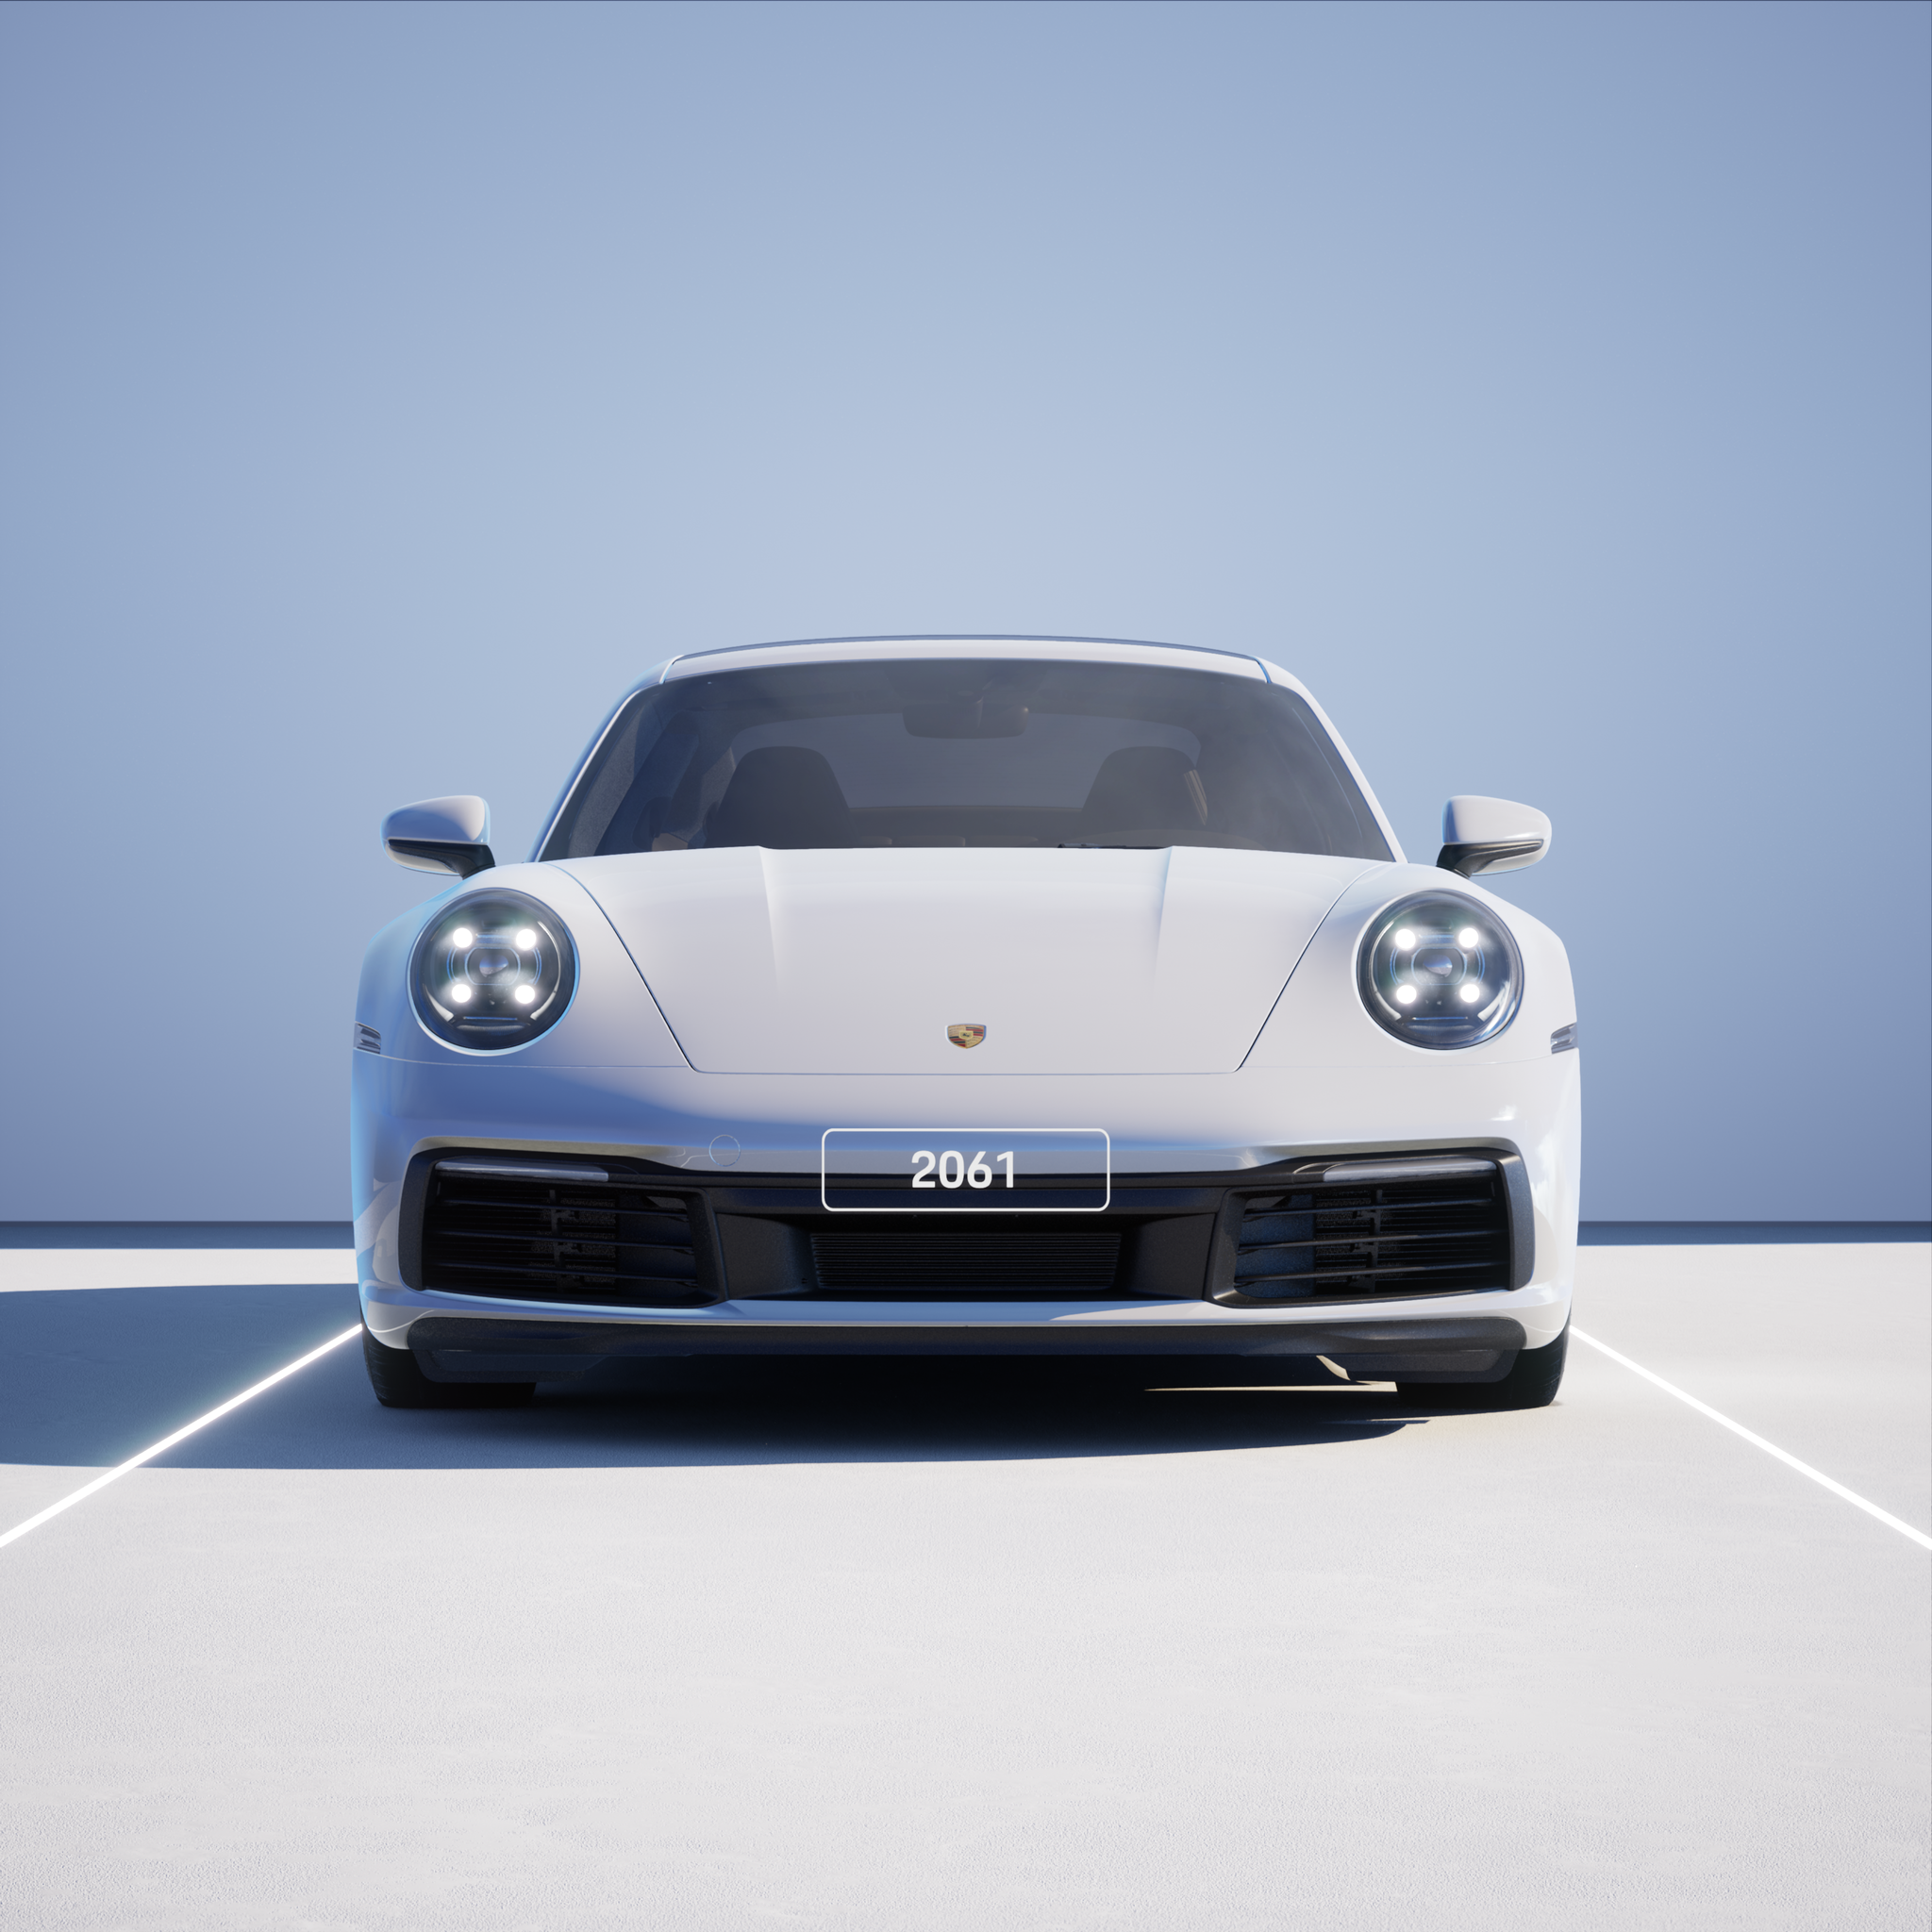 The PORSCHΞ 911 2061 image in phase